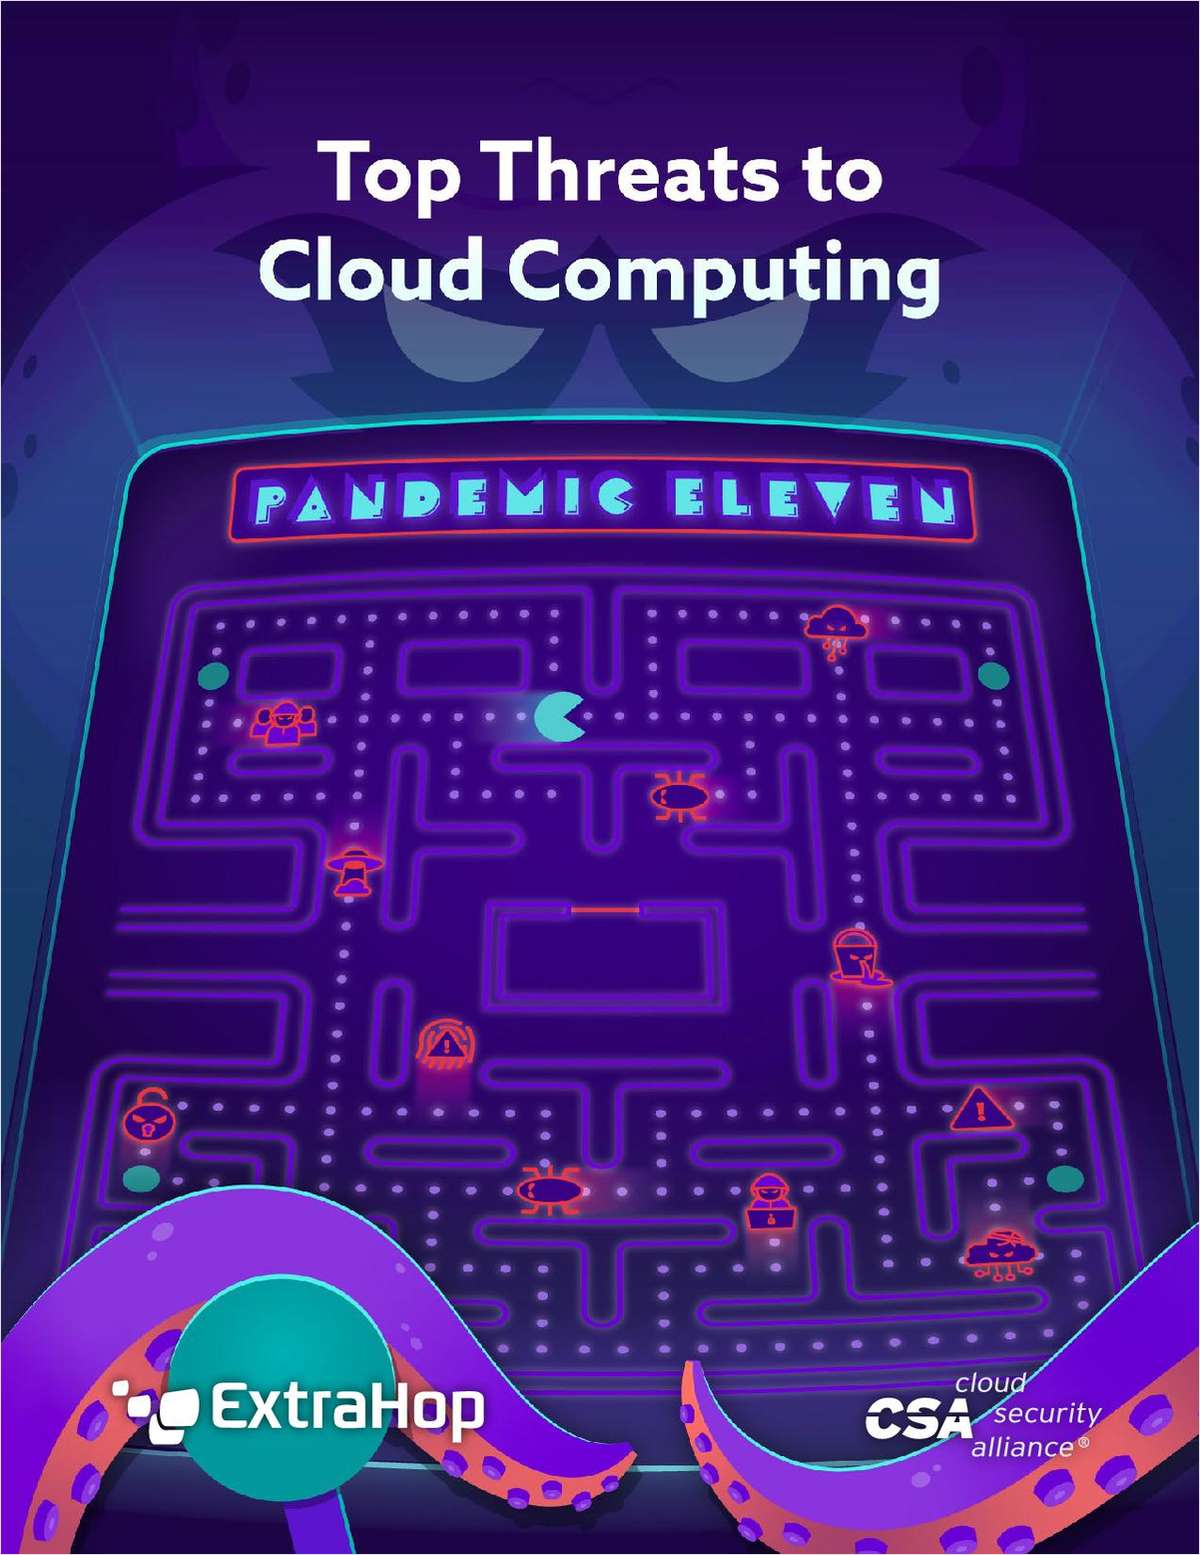 Top Cloud Threats to Cloud Computing: Pandemic Eleven